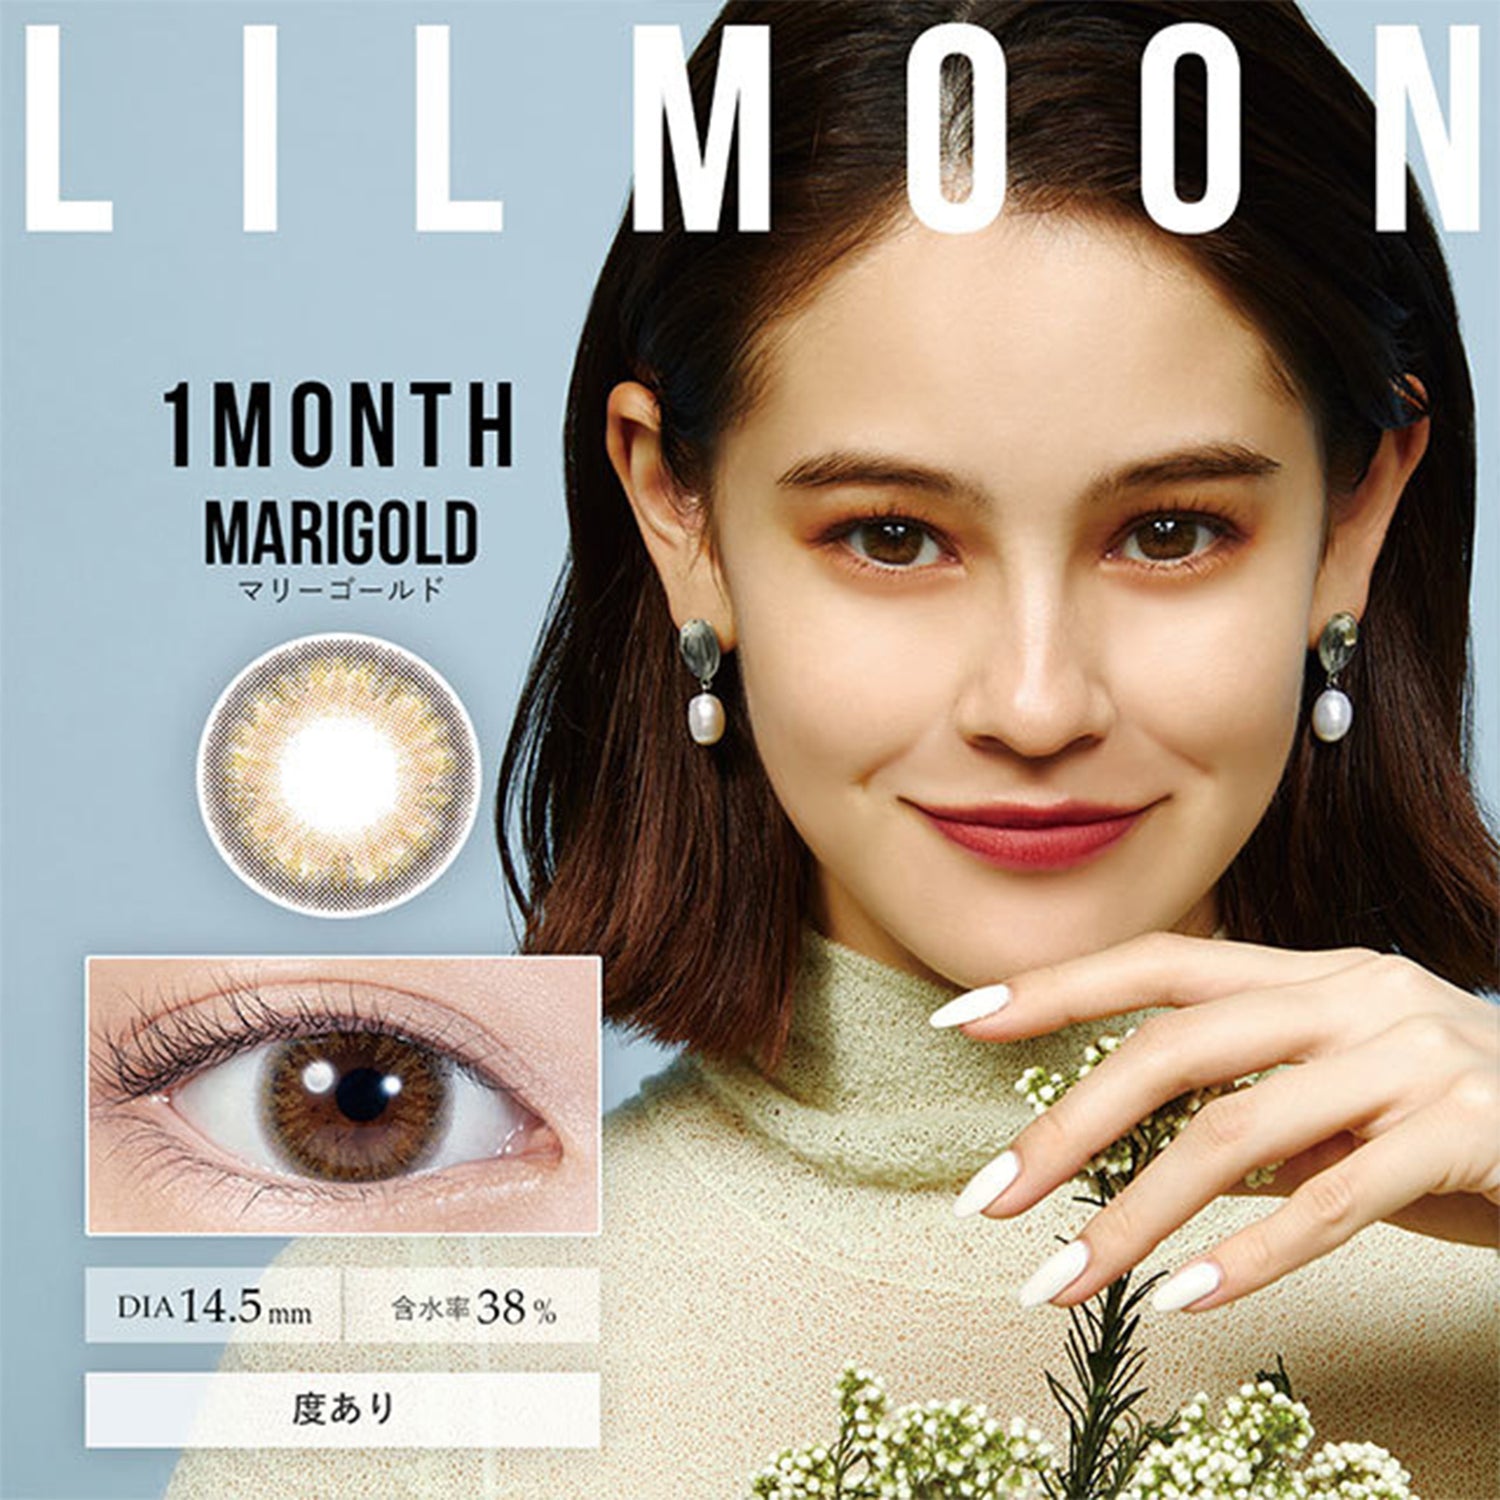 LIL MOON Monthy Contact Lenses-Marigold